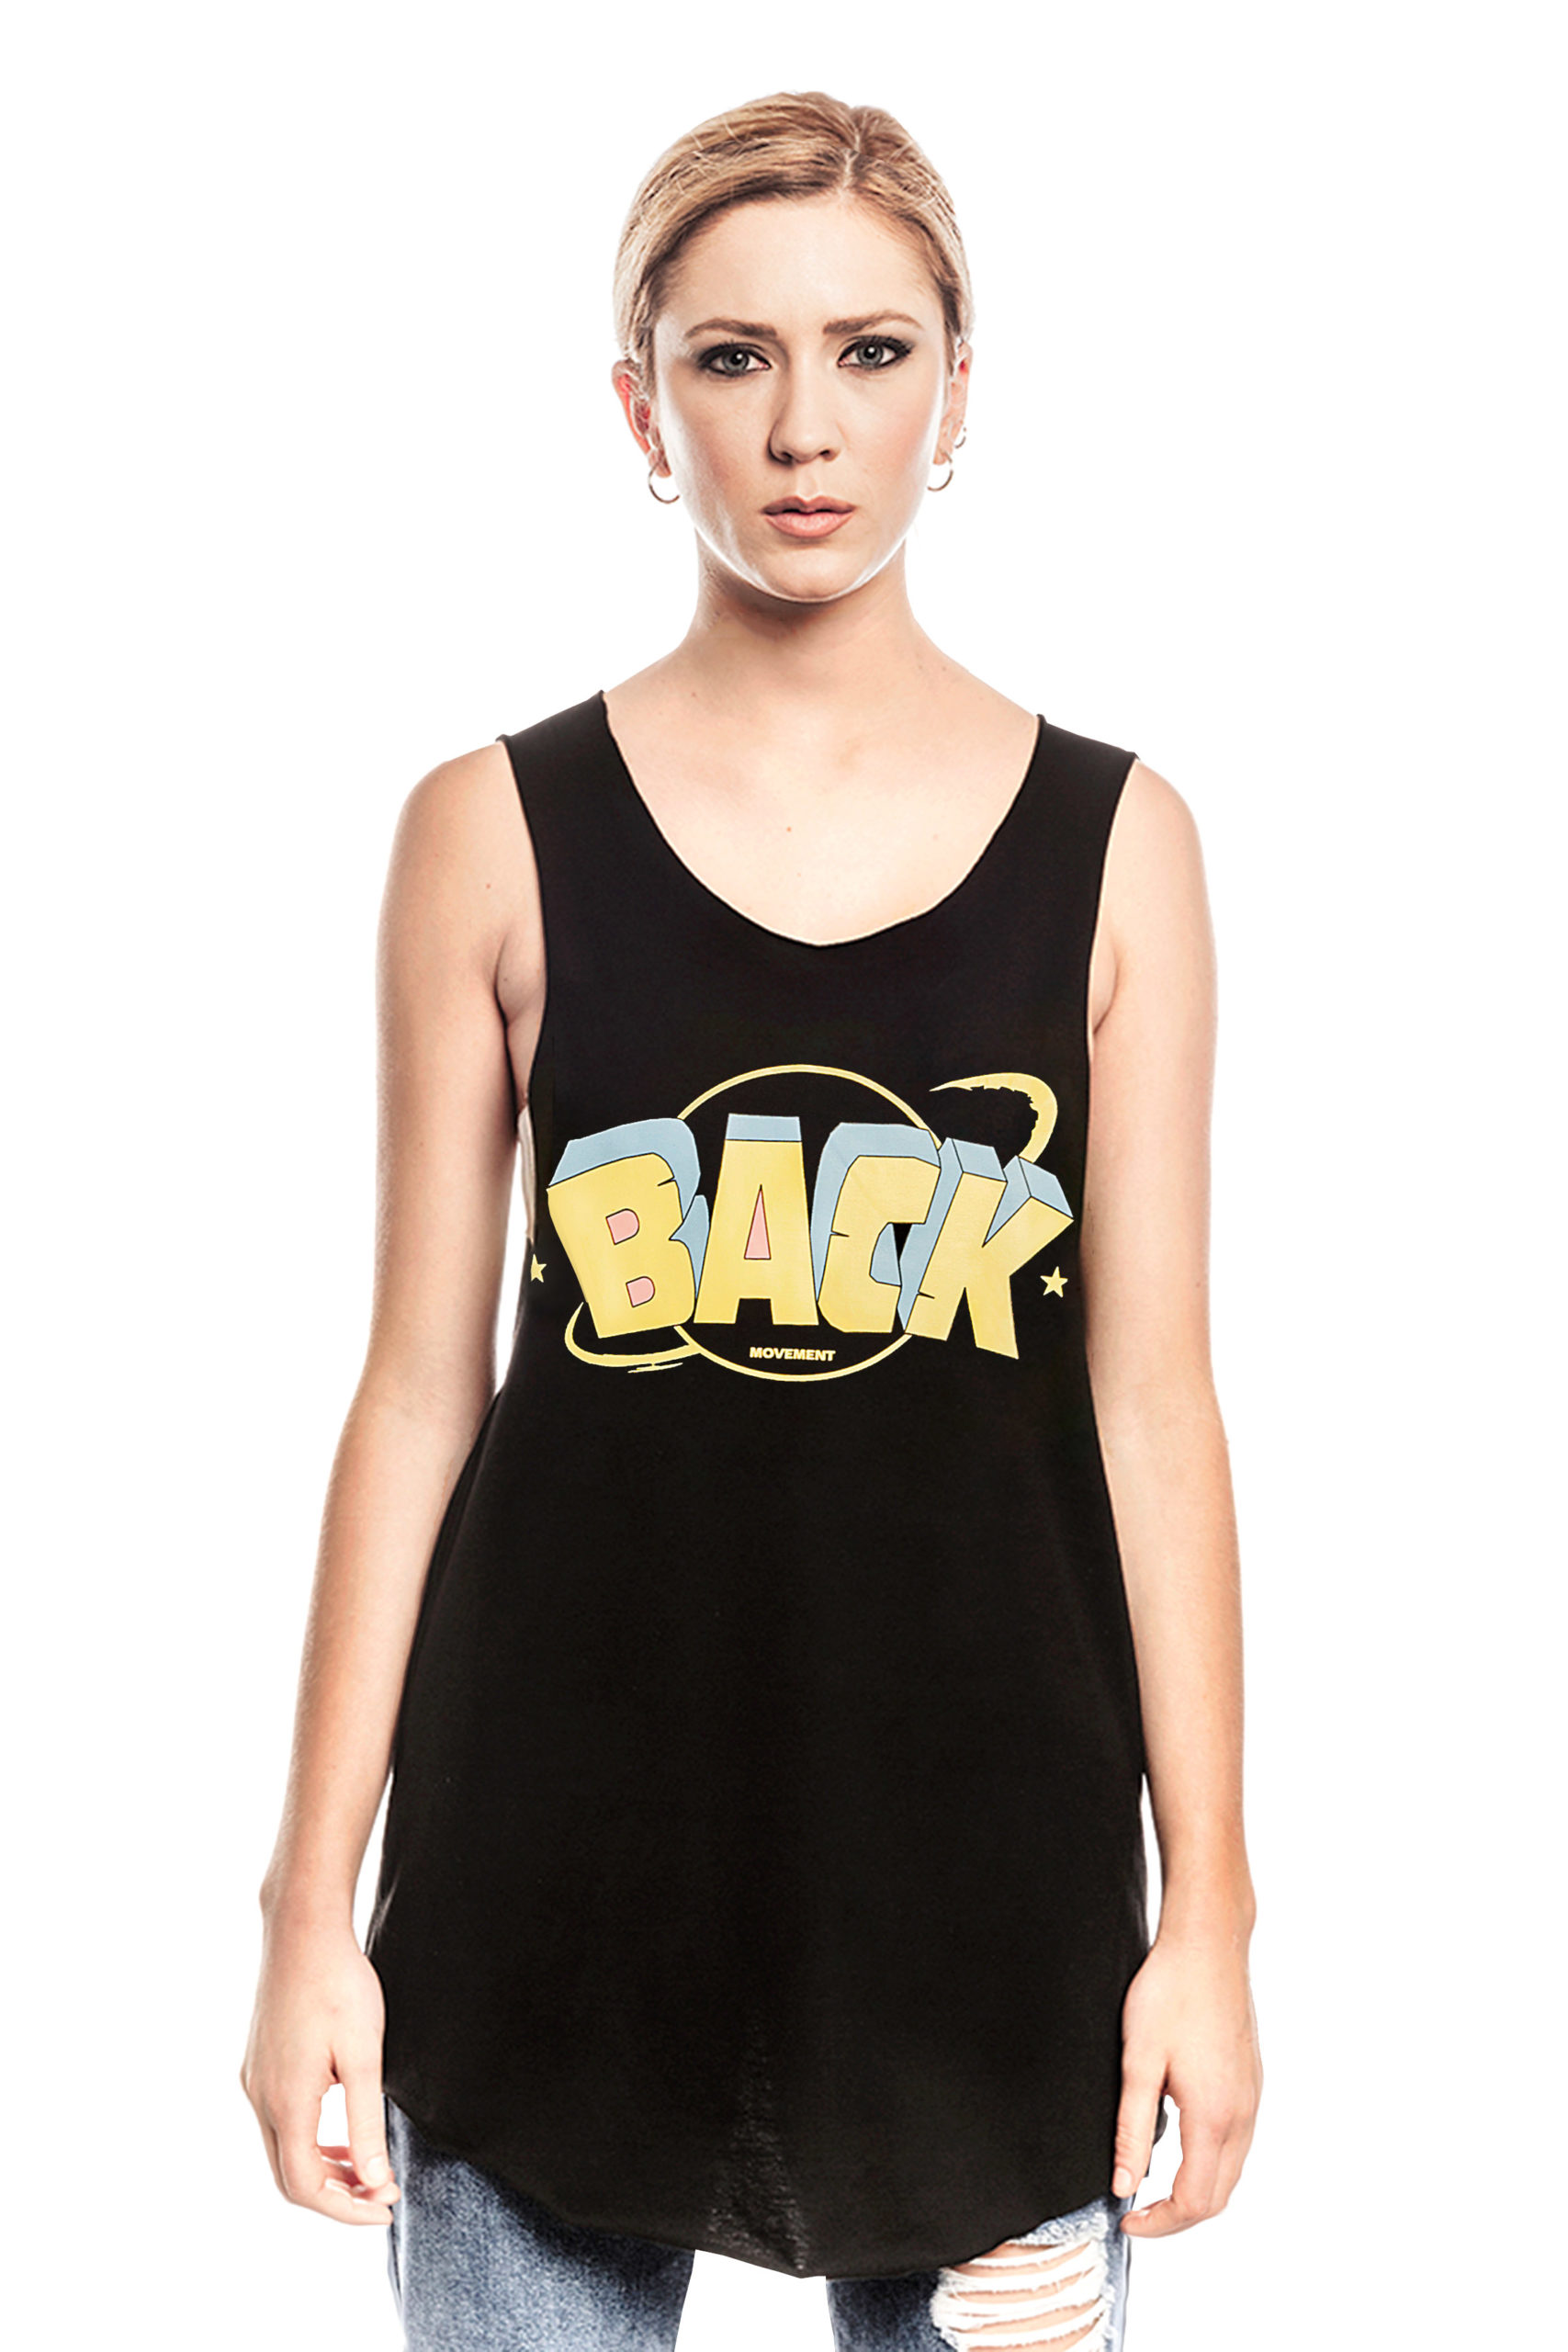 BACK AND YELLOW BLACK TANK – Boyfriend Style – SUMMER17 COLLECTION